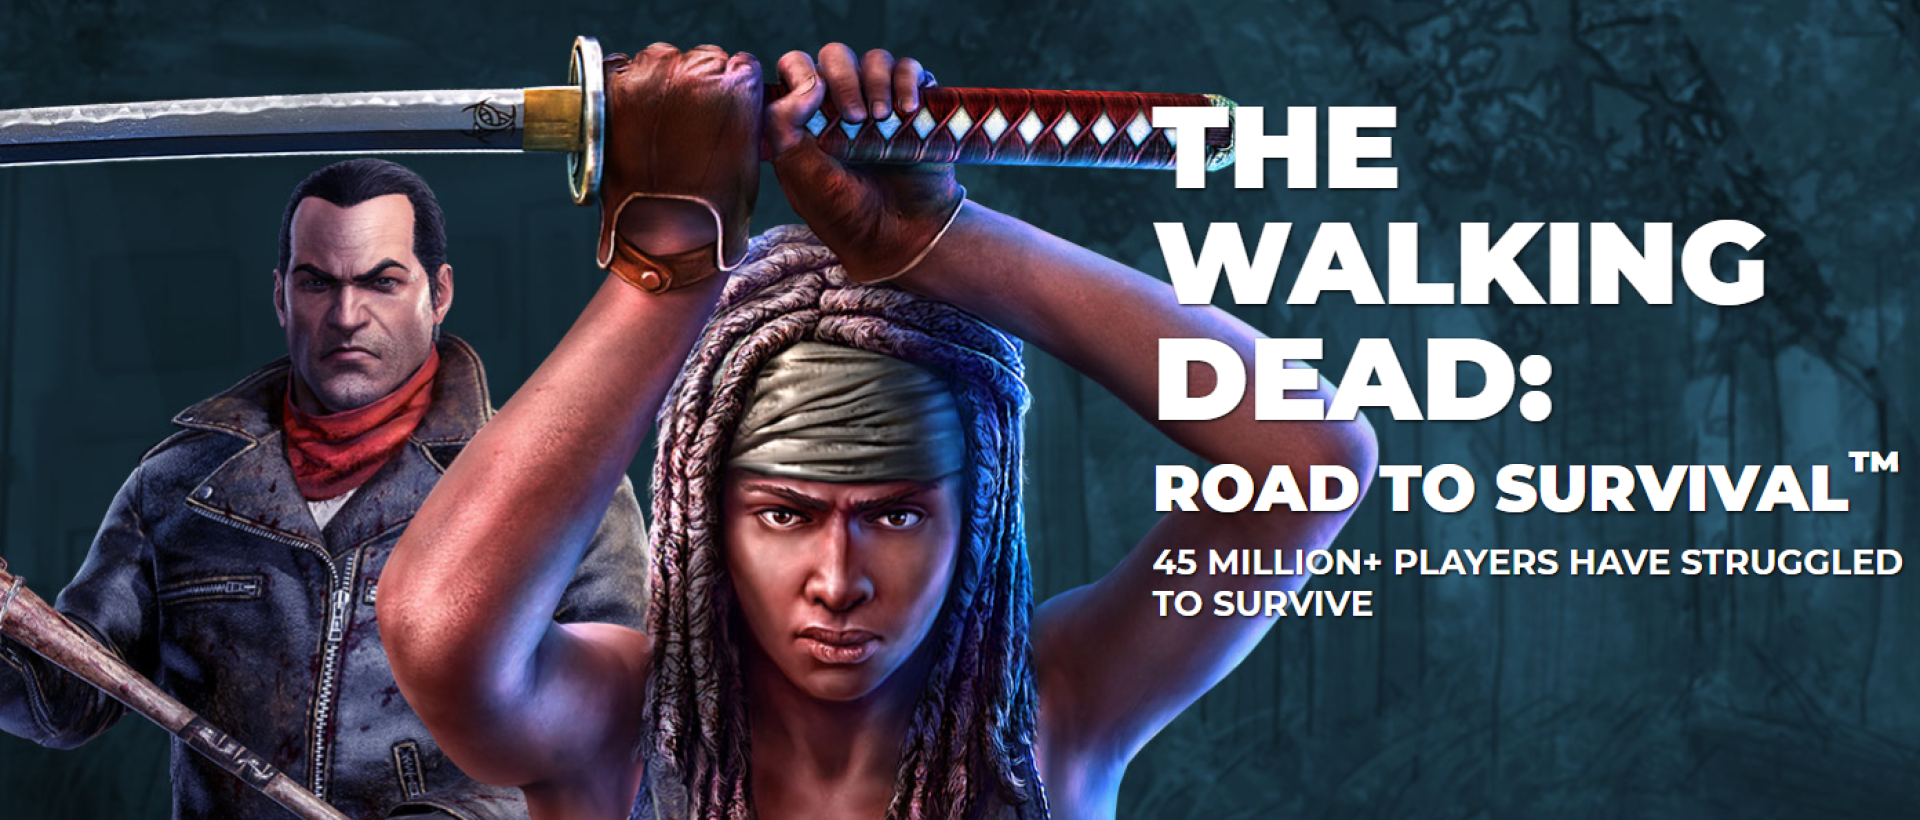 the walking dead road to survival download free